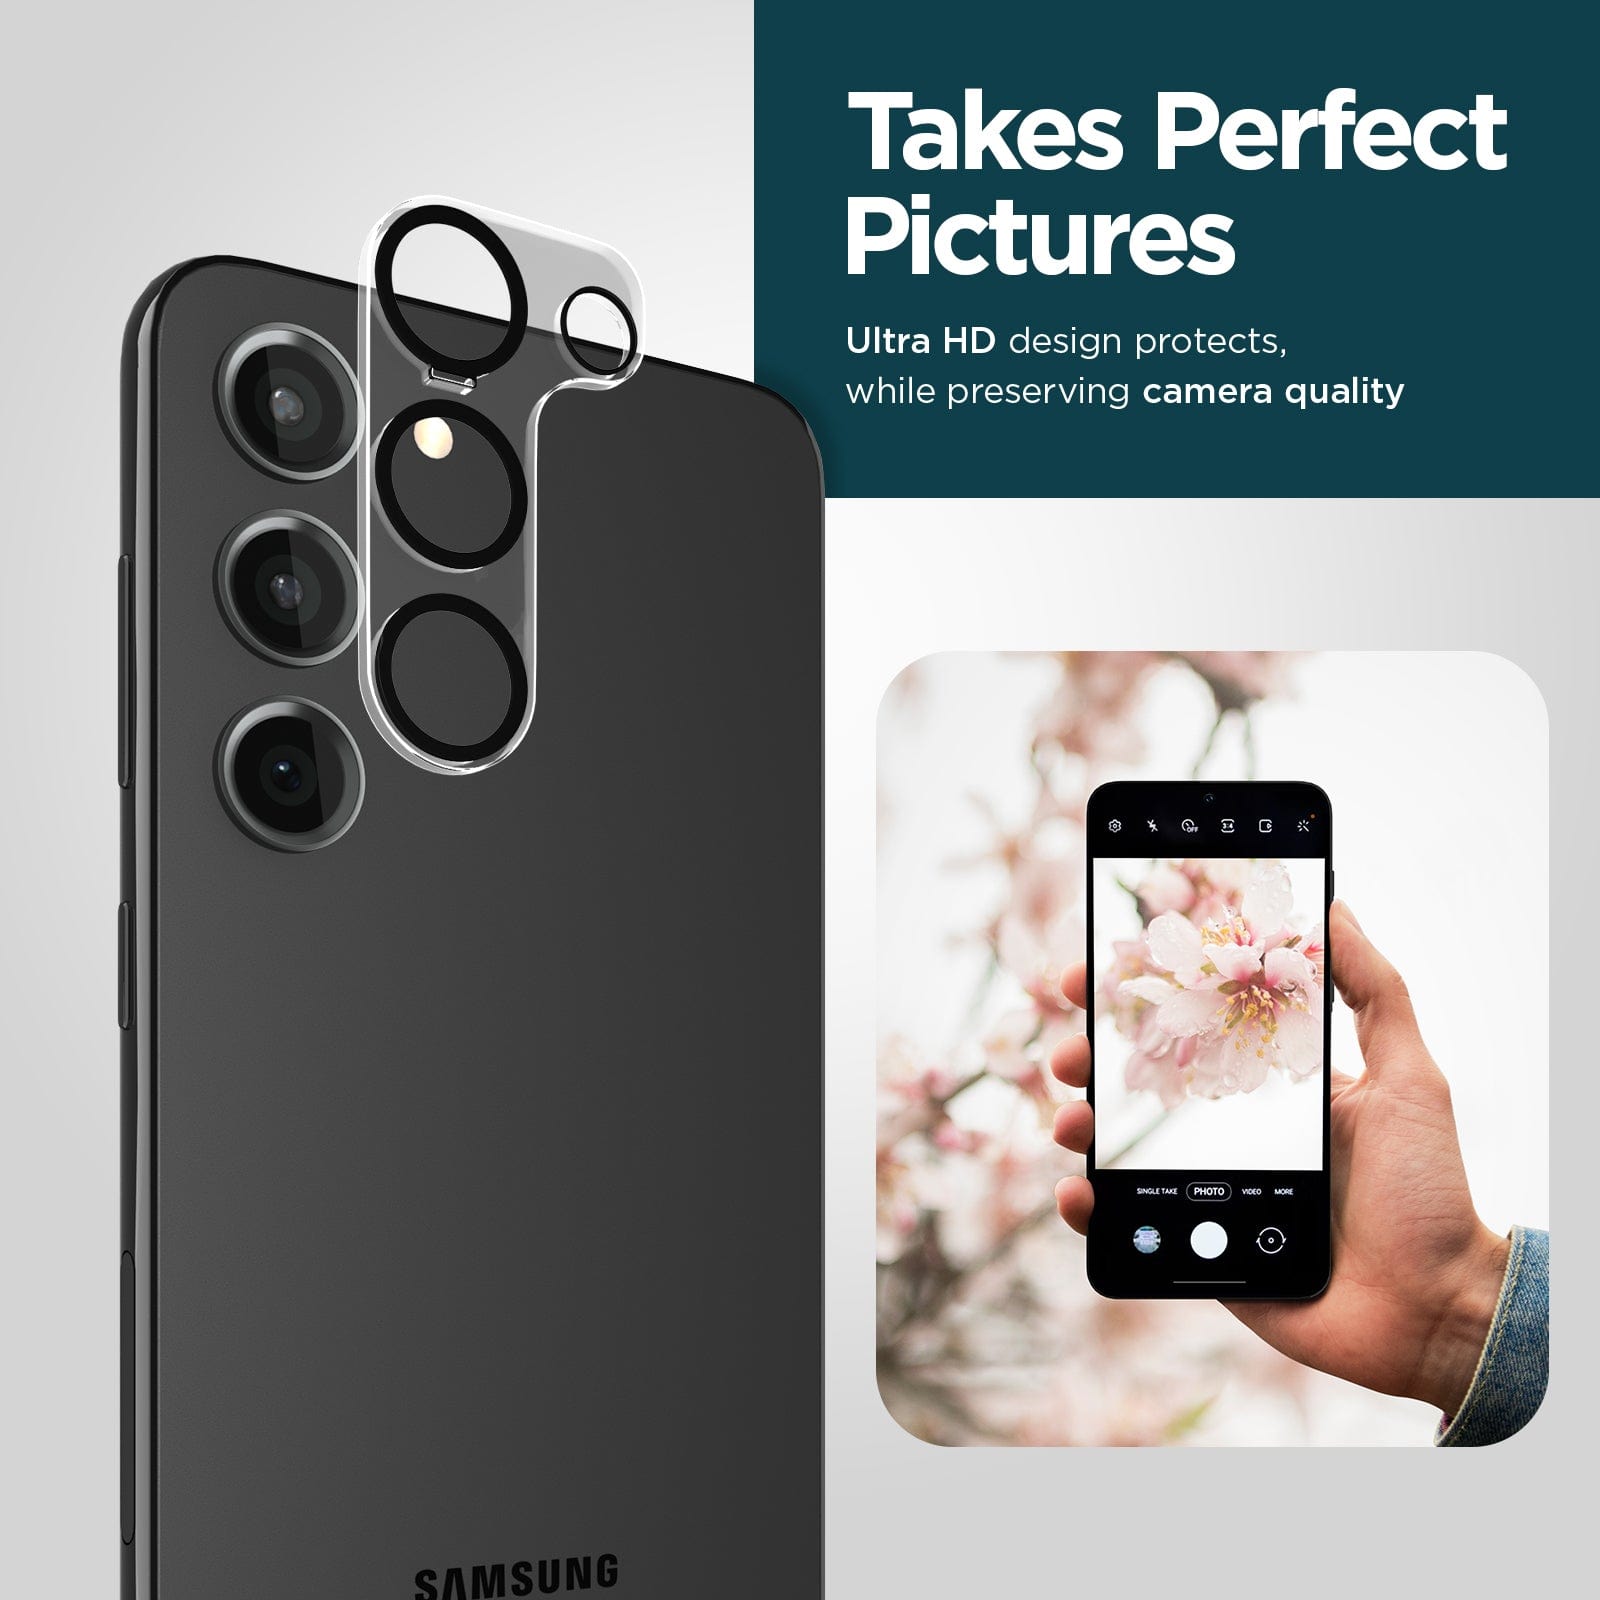 TAKES PERFECT PICTURES. ULTRA HD DESIGN PROTECTS, WHILE PRESERVING CAMERA QUALITY.